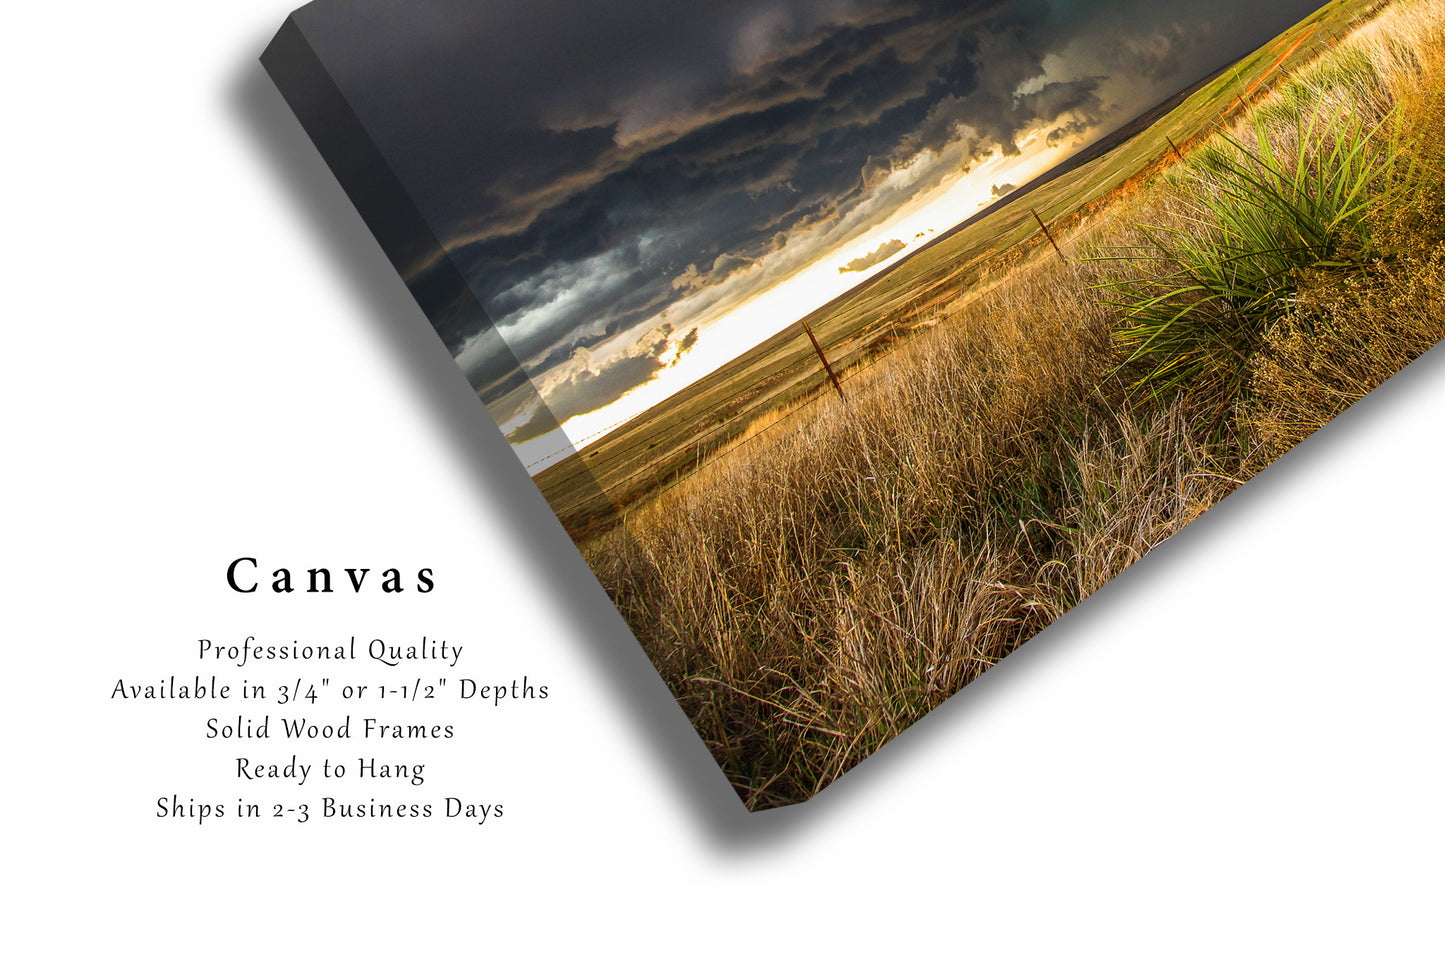 Storm Canvas Wall Art (Ready to Hang) Gallery Wrap of Thunderstorm Over Open Prairie in Texas Panhandle Great Plains Photography Western Decor